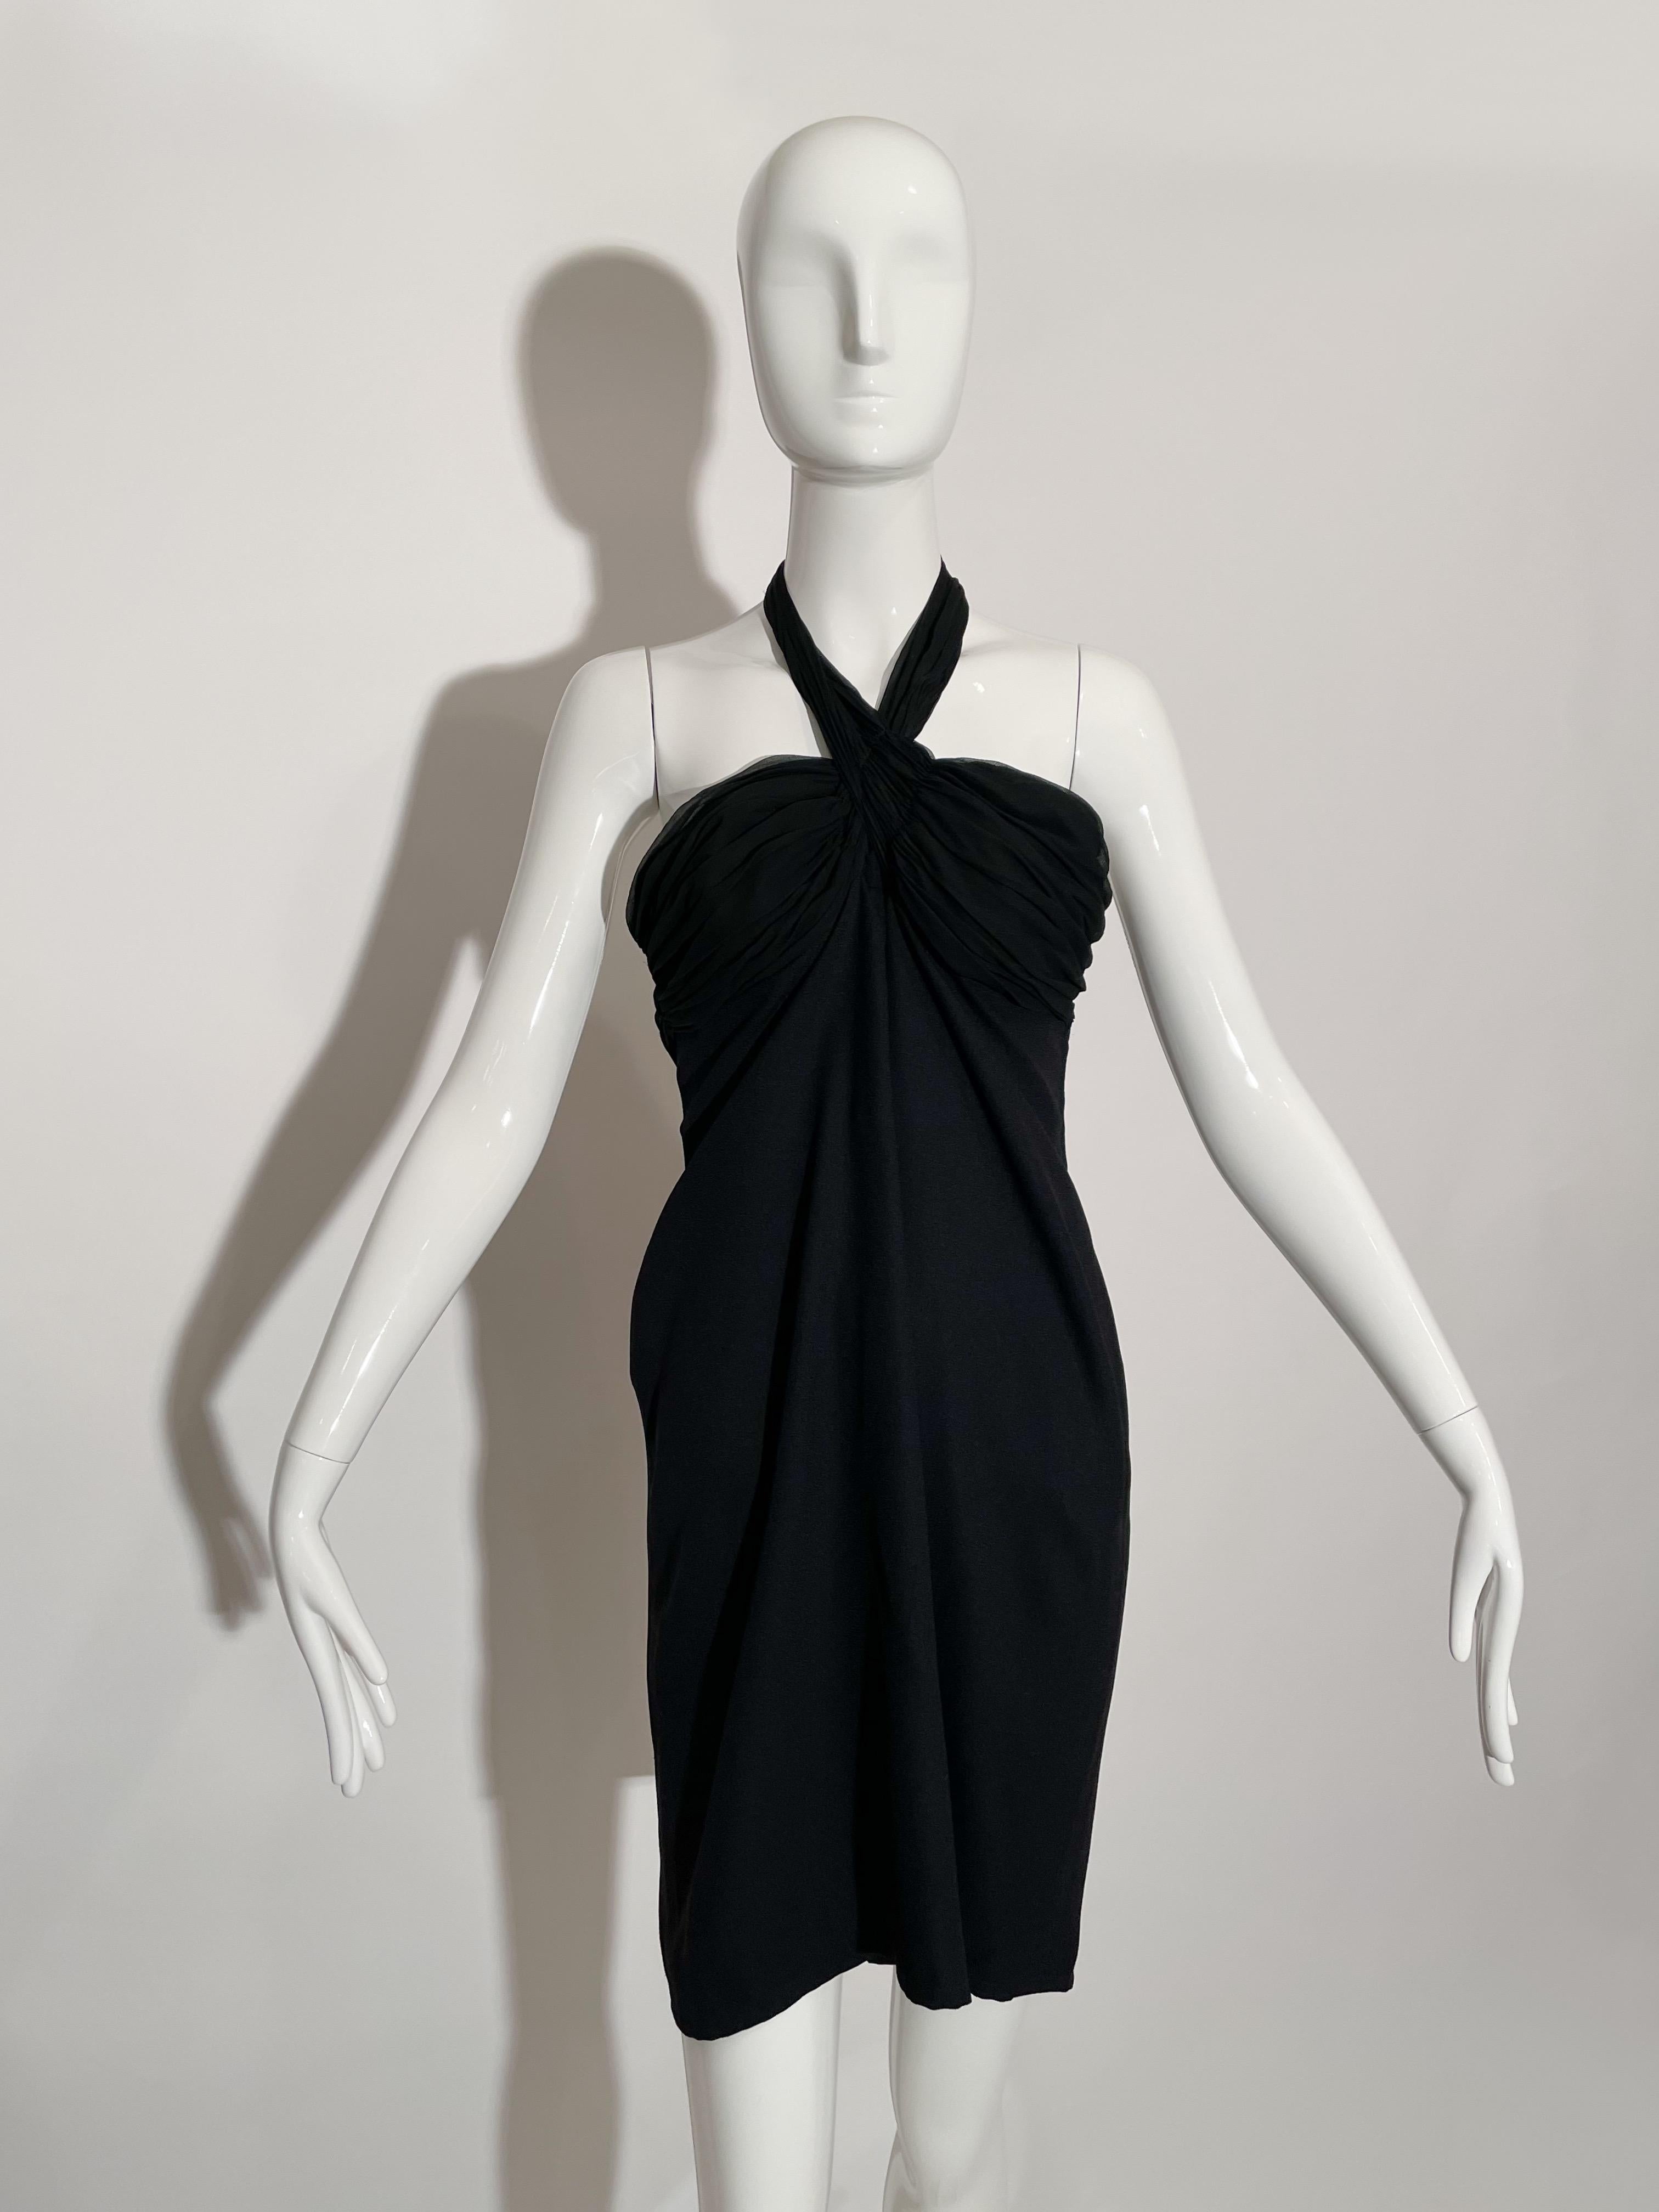 Black halter dress. Ruching detail at chest. Side bust zipper closure.  Acetate and Rayon. Lined. Made in France. 

*Condition: excellent vintage condition, no visible flaws.


Measurements Taken Laying Flat (inches)—

Bust: 32 in.

Waist: 29